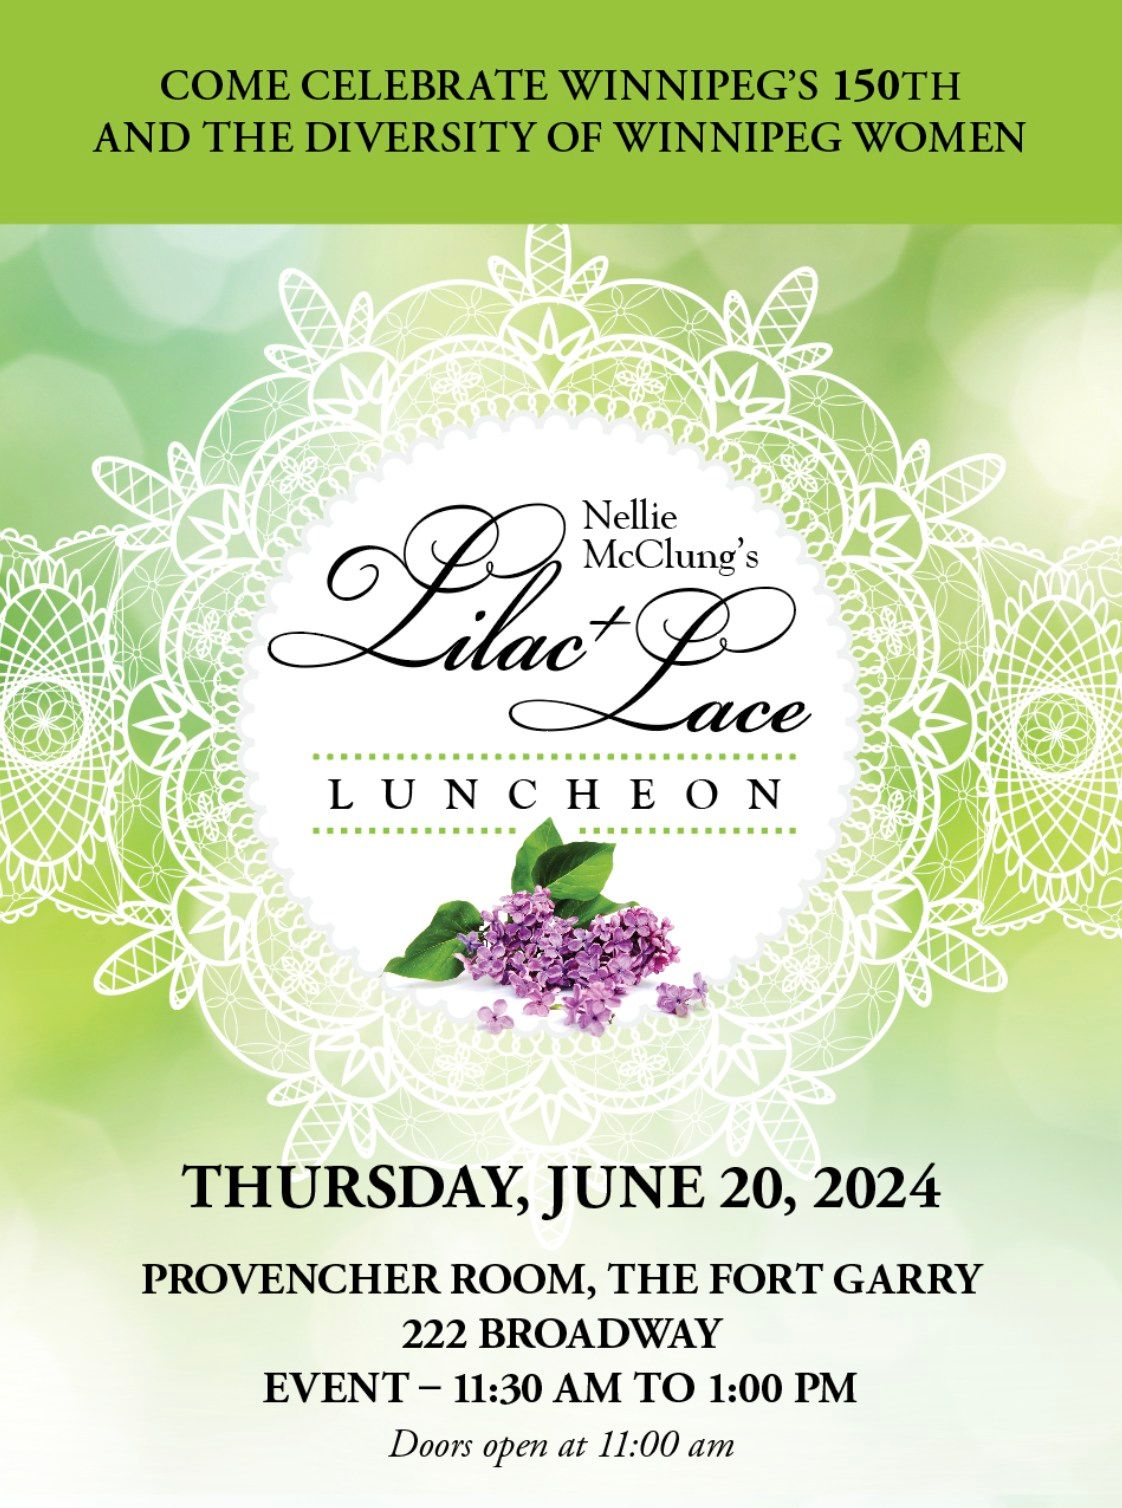 Nellie McClung's Lilac + Lace Luncheon - June 20, 2024